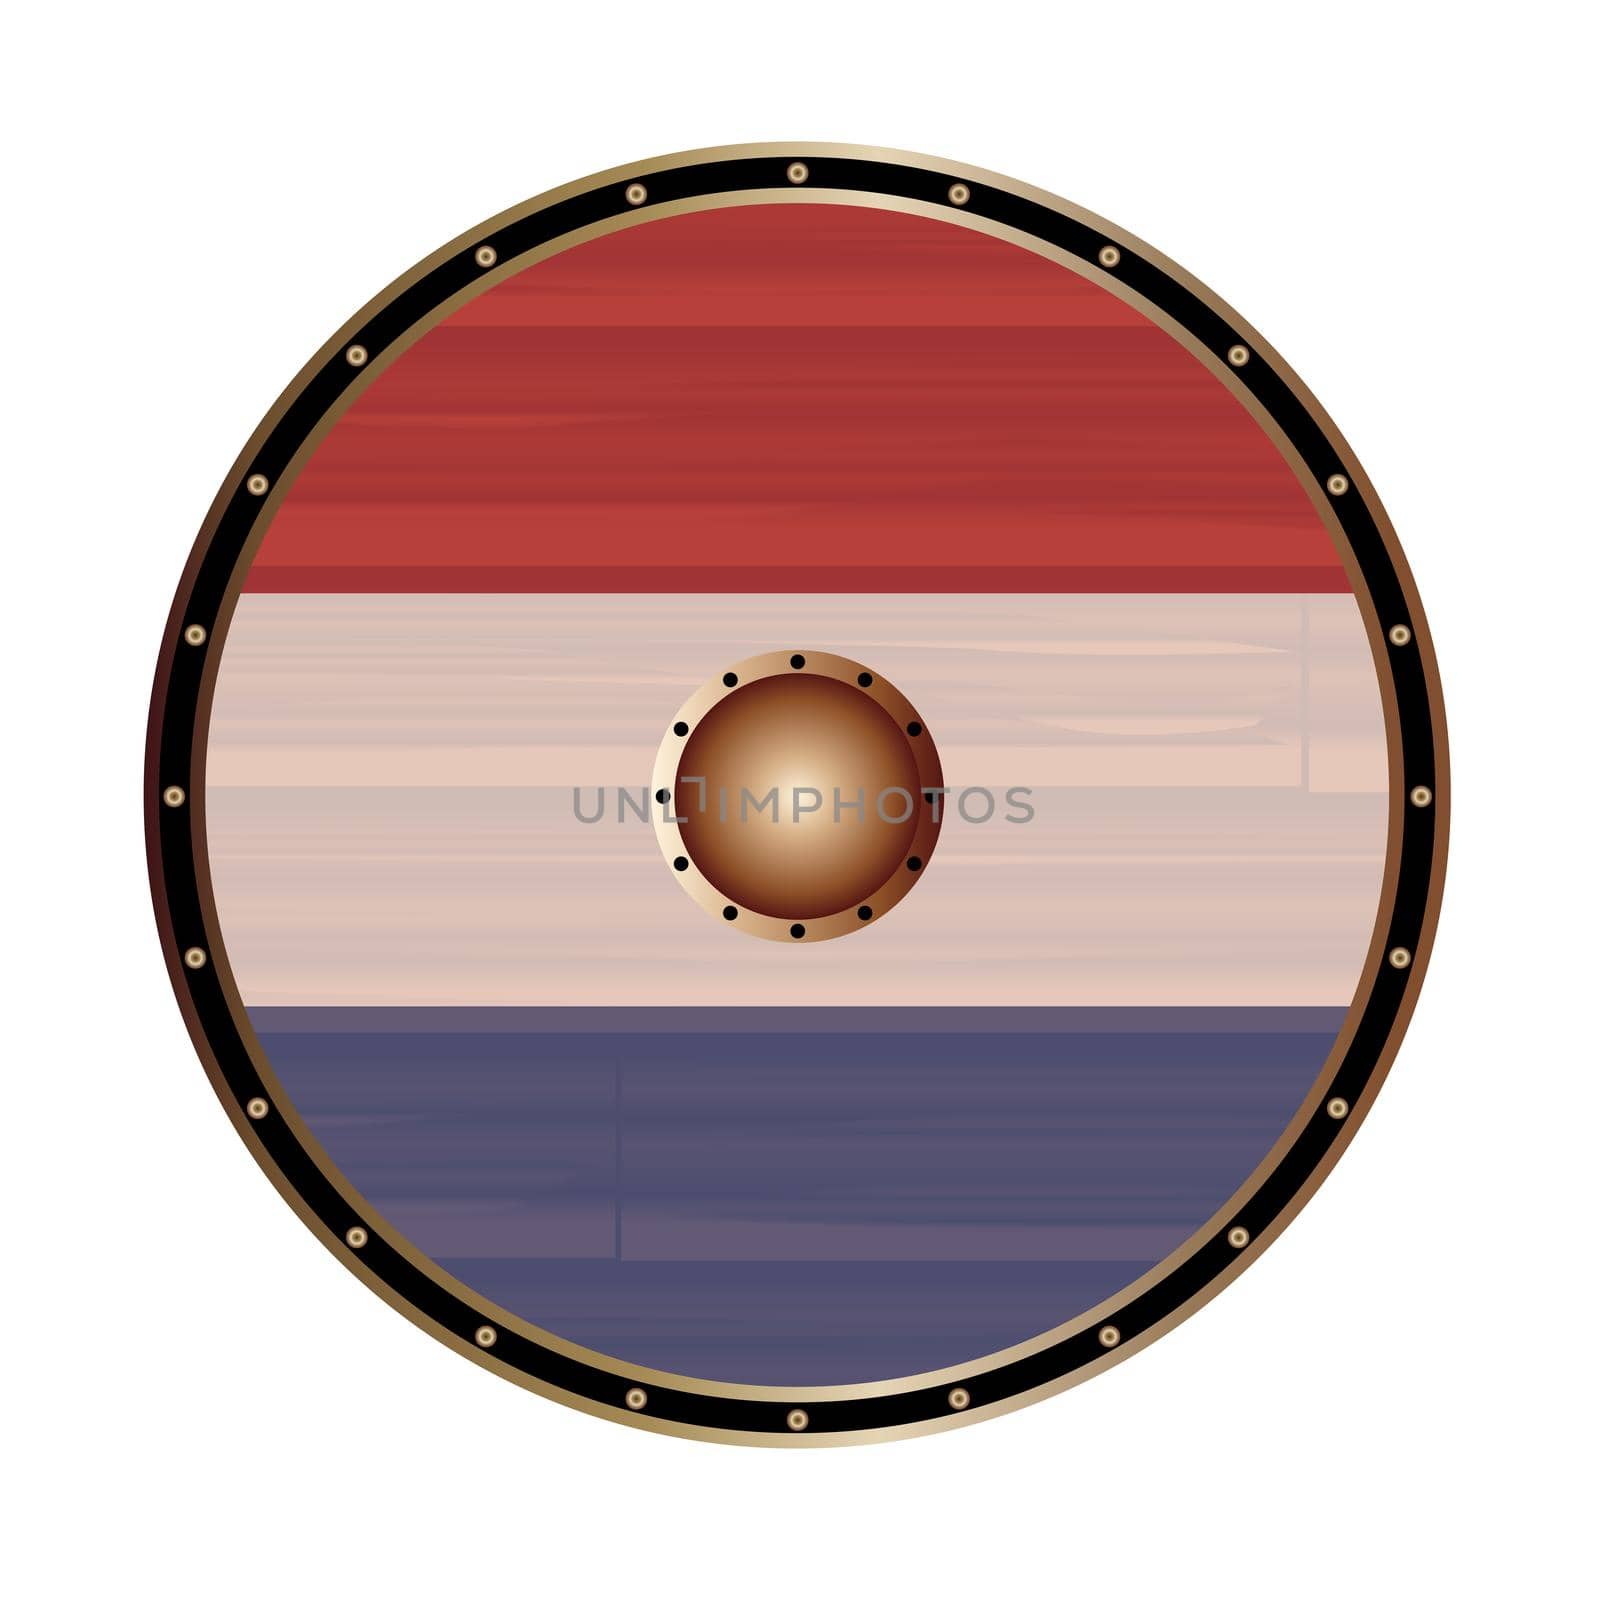 A Viking round shield with the Netherlands flag color design isolated on a white background